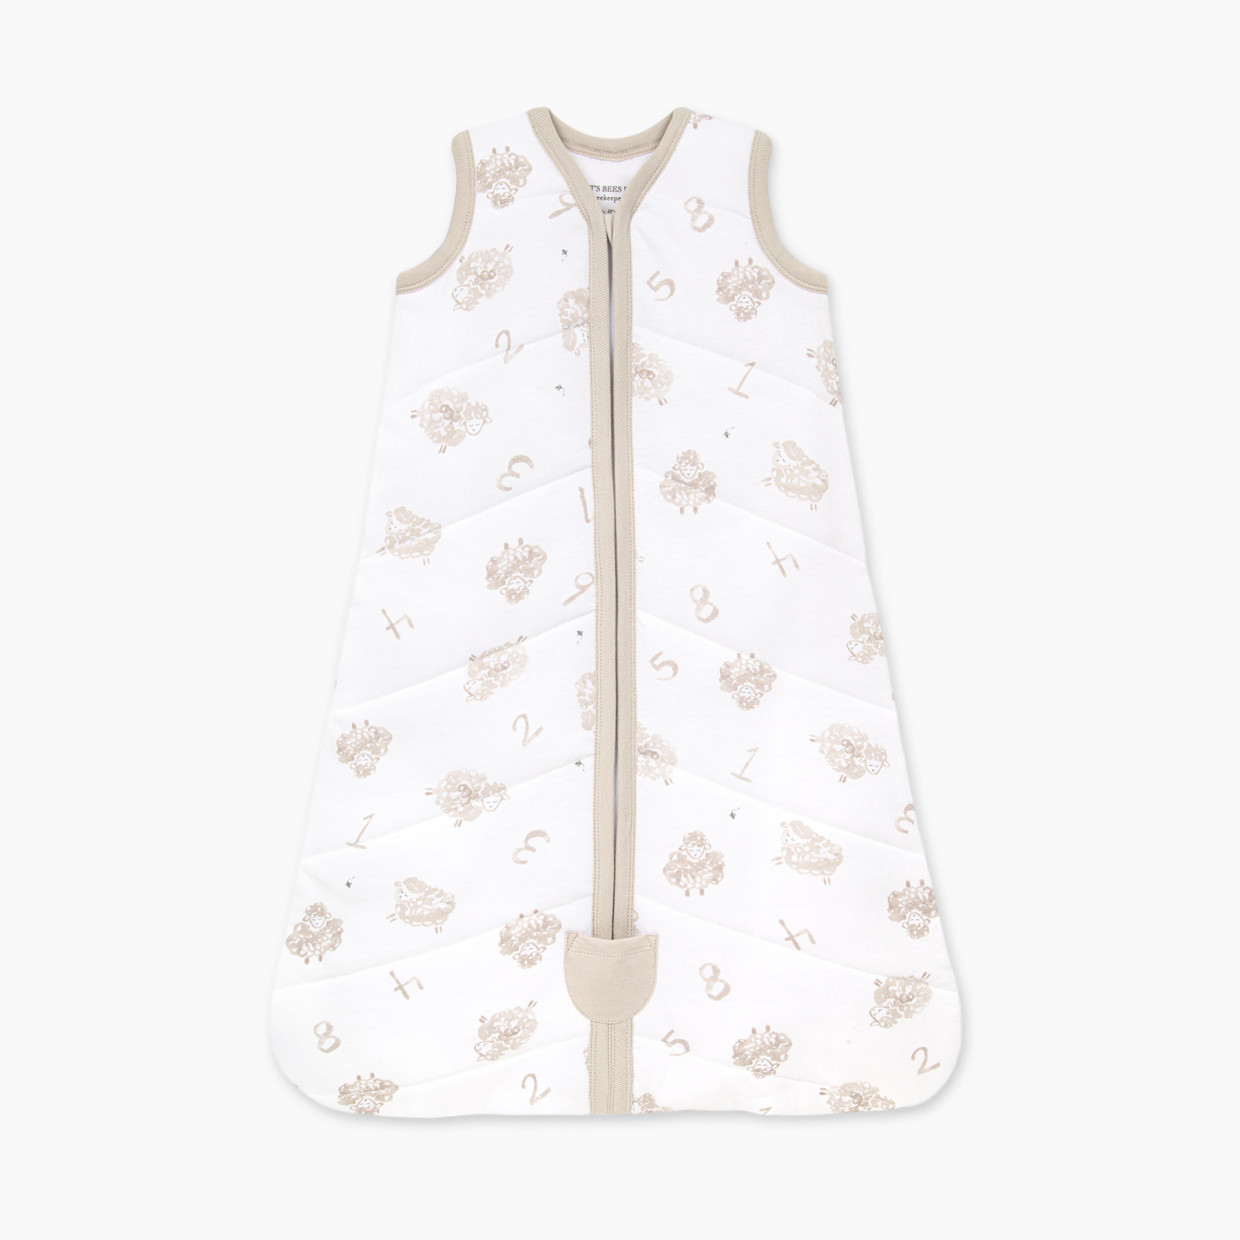 Burt's Bees Baby Quilted Beekeeper Organic Cotton Wearable Blanket - Counting Sheep, Small.